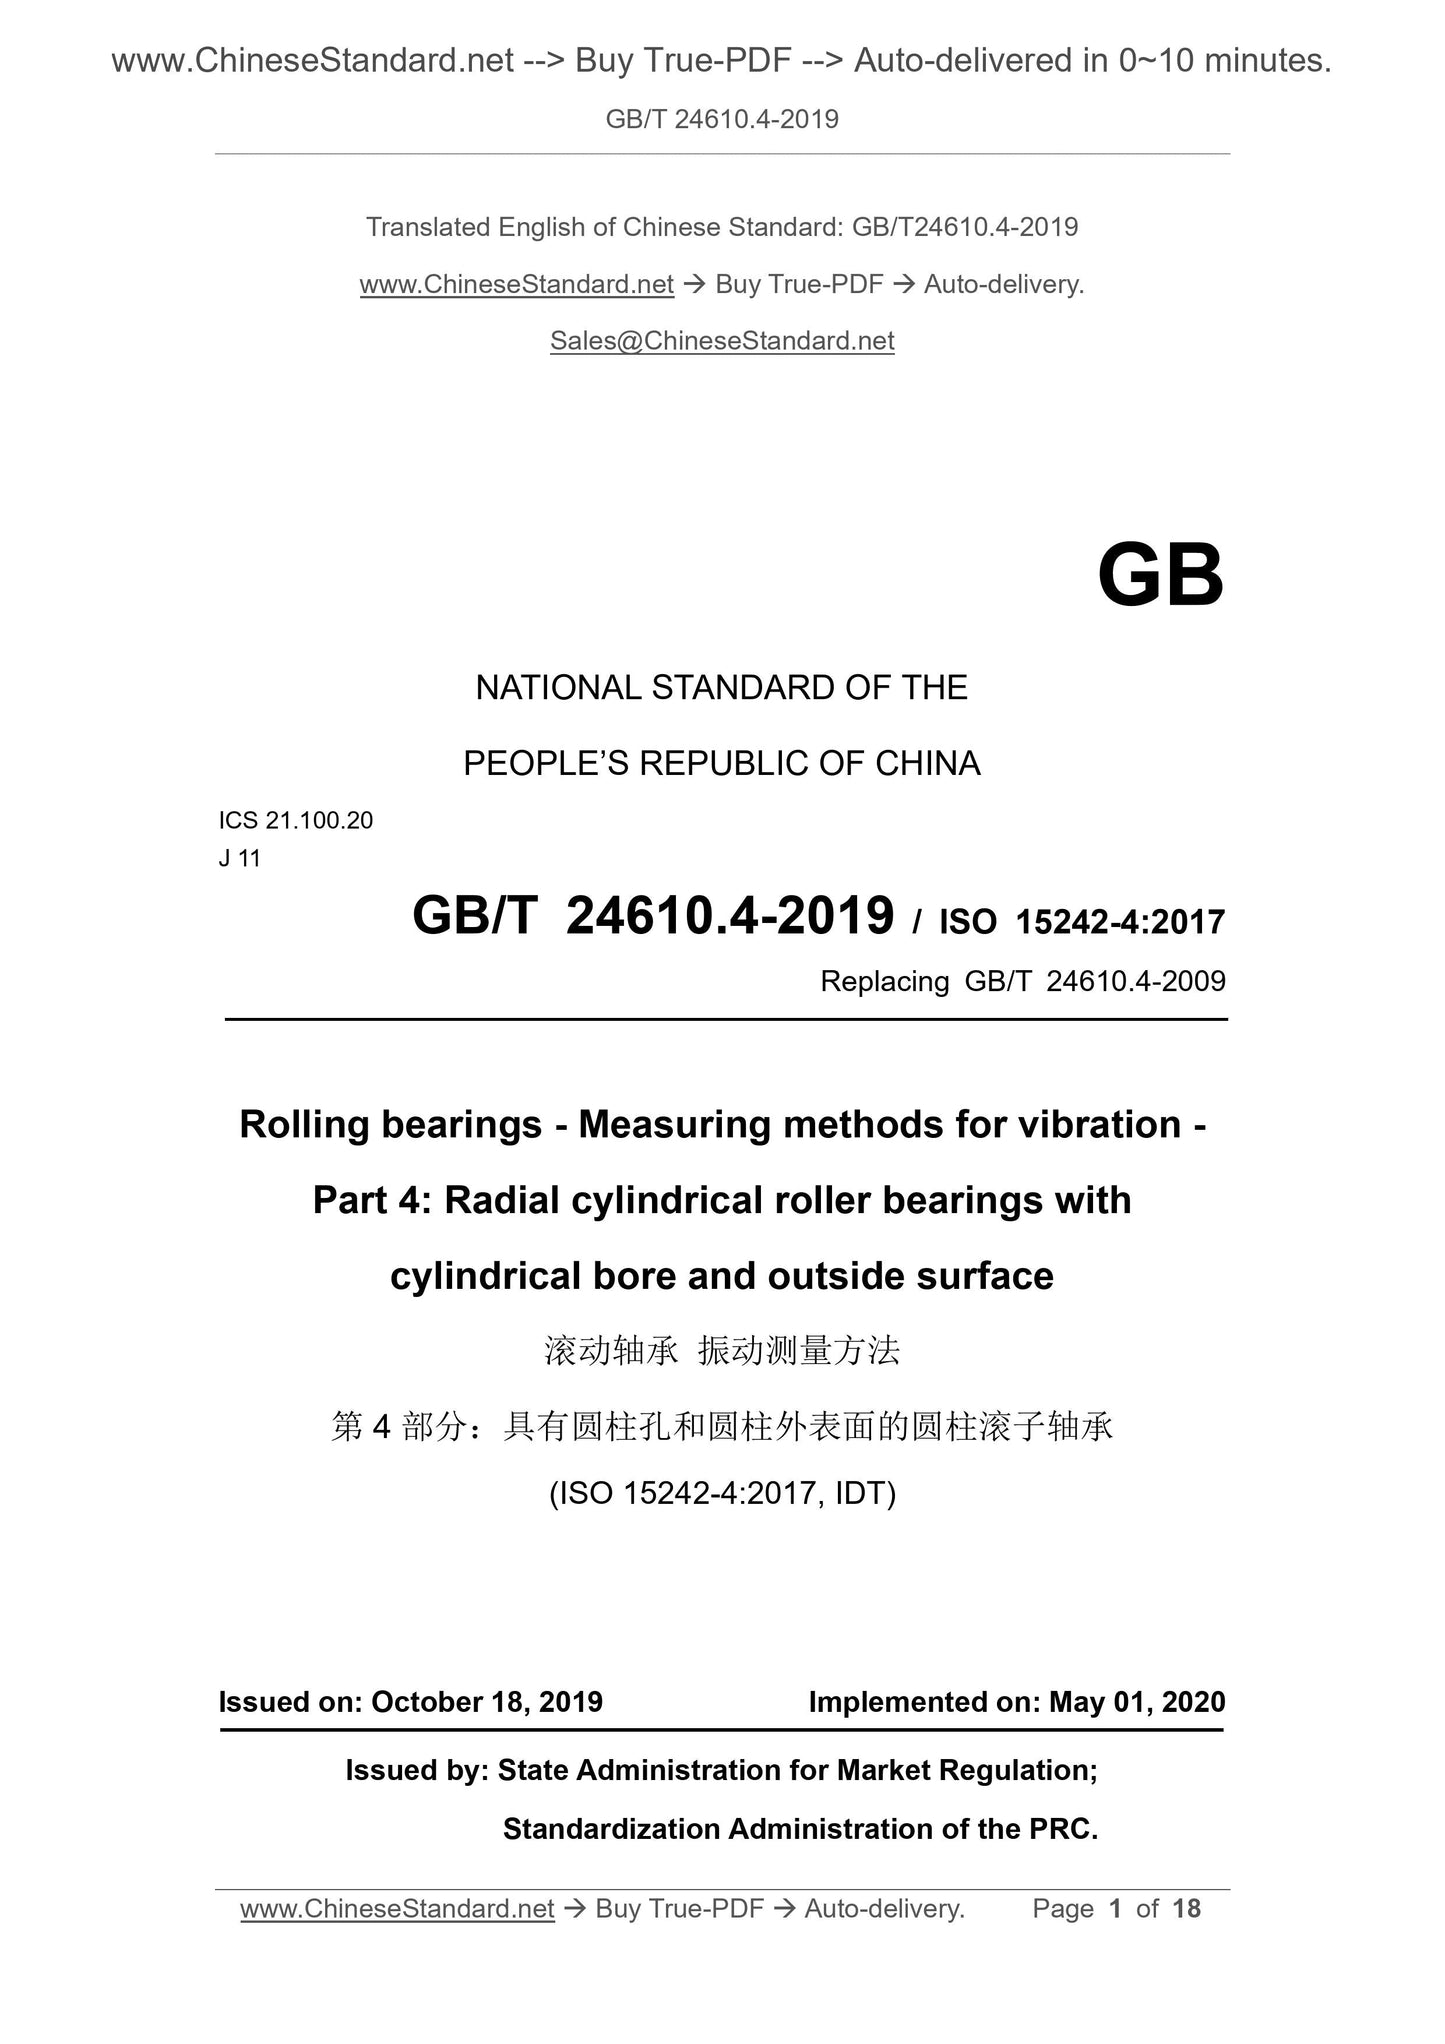 GB/T 24610.4-2019 Page 1